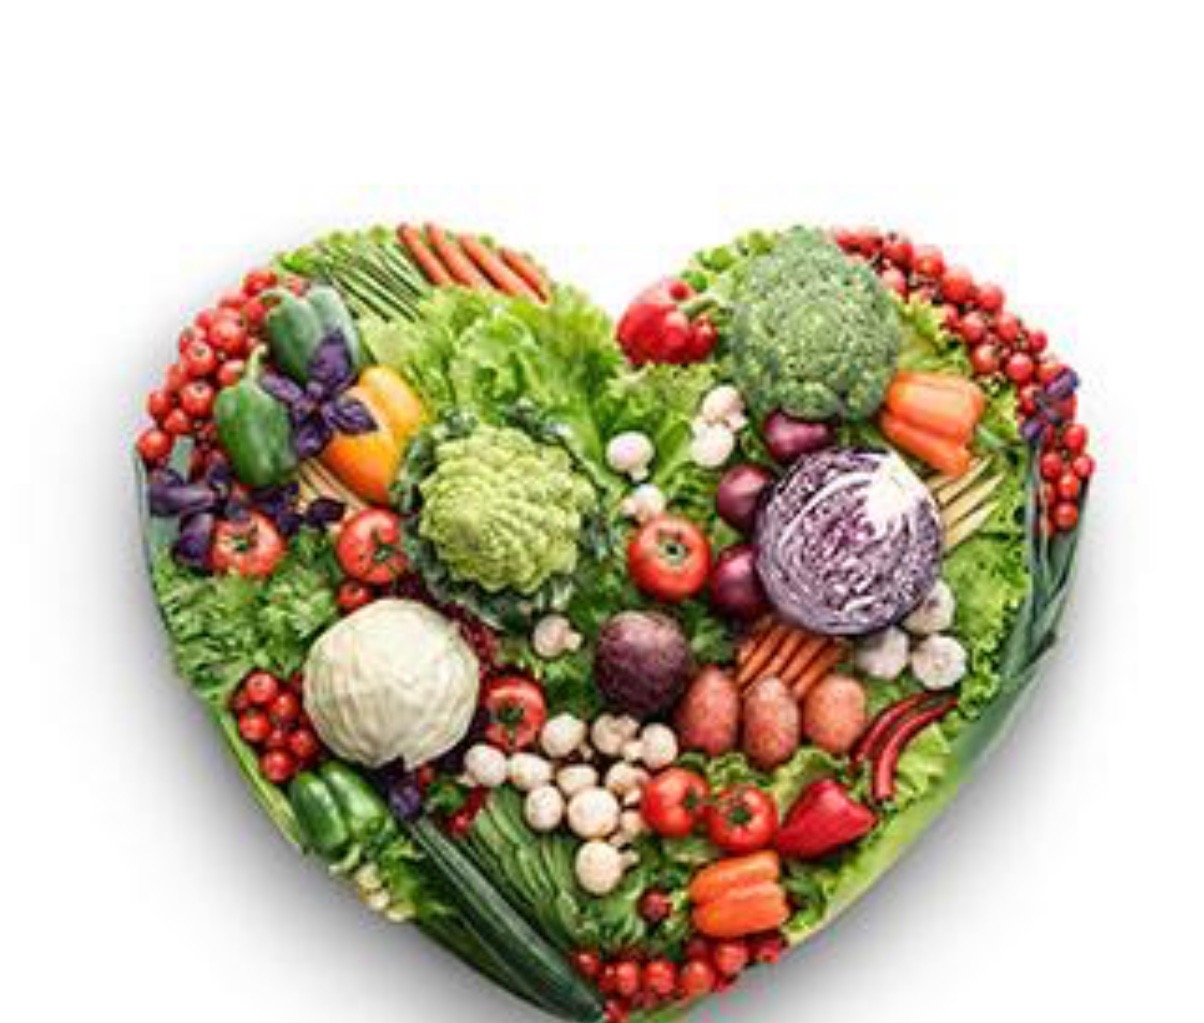 A photograph of vegetables arranged in the shape of a heart.